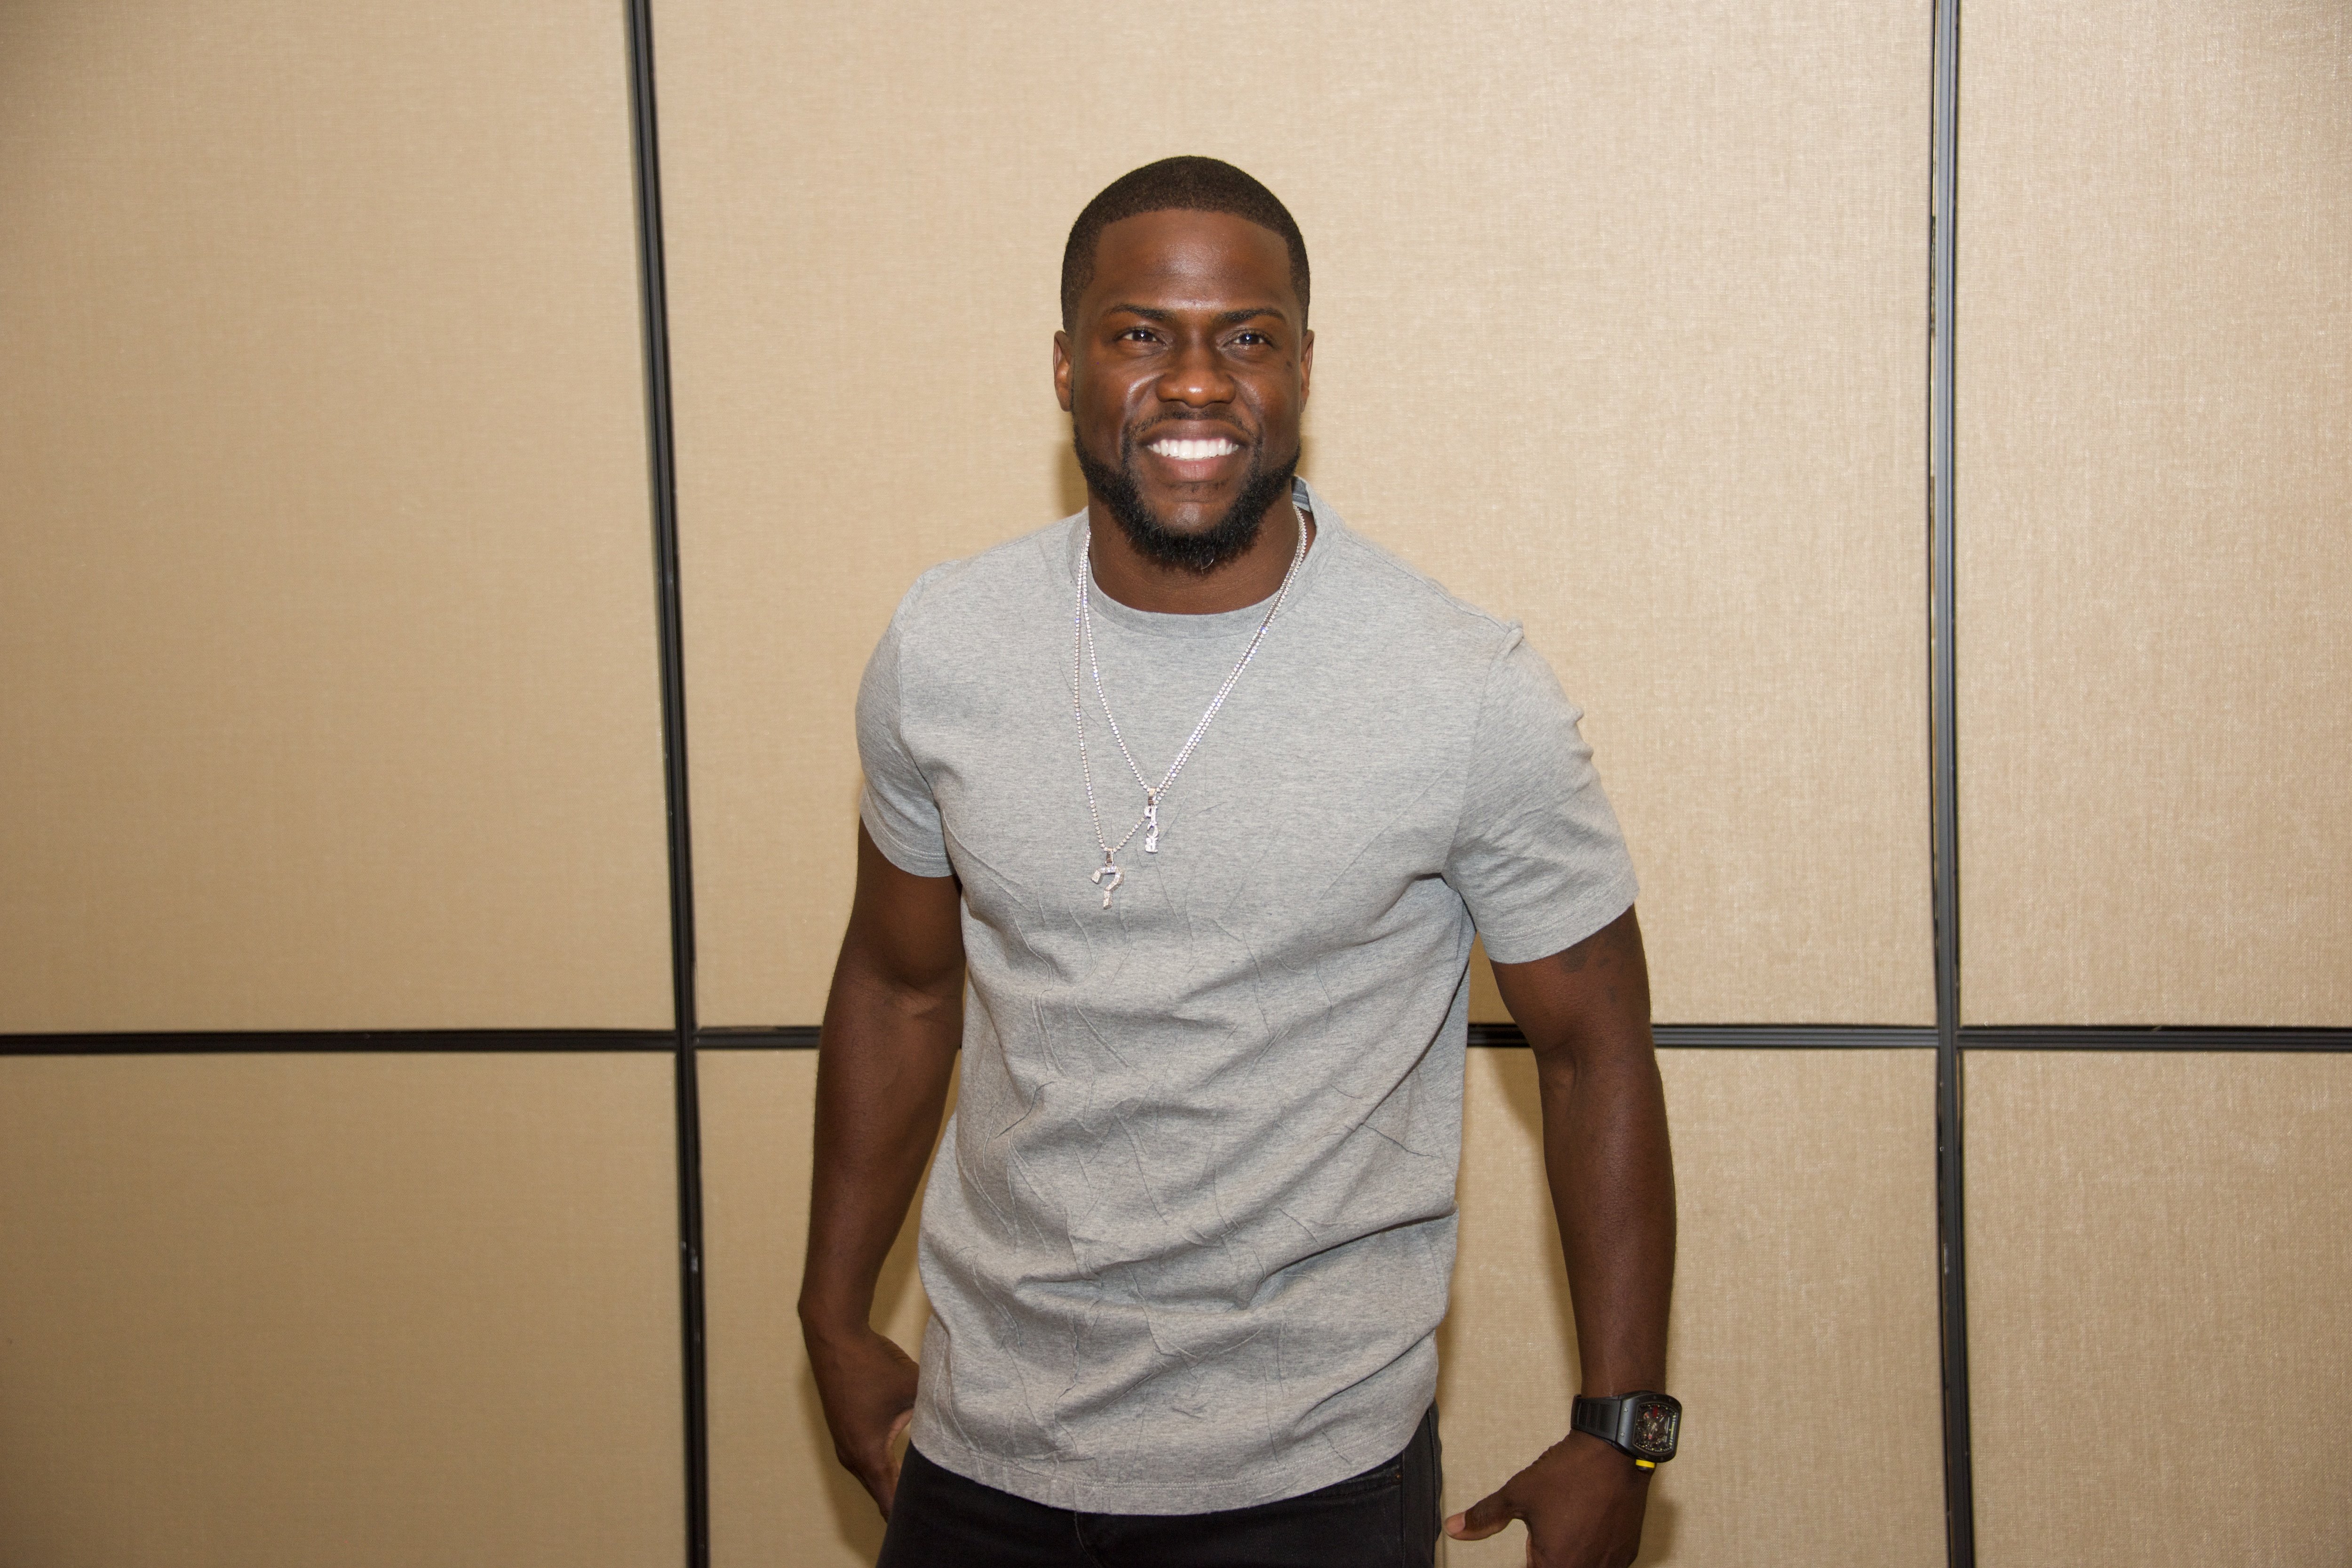 Kevin Hart at "The Secret Life of Pets" movie press conference on June 24, 2016 in New York City. | Photo: Getty Images